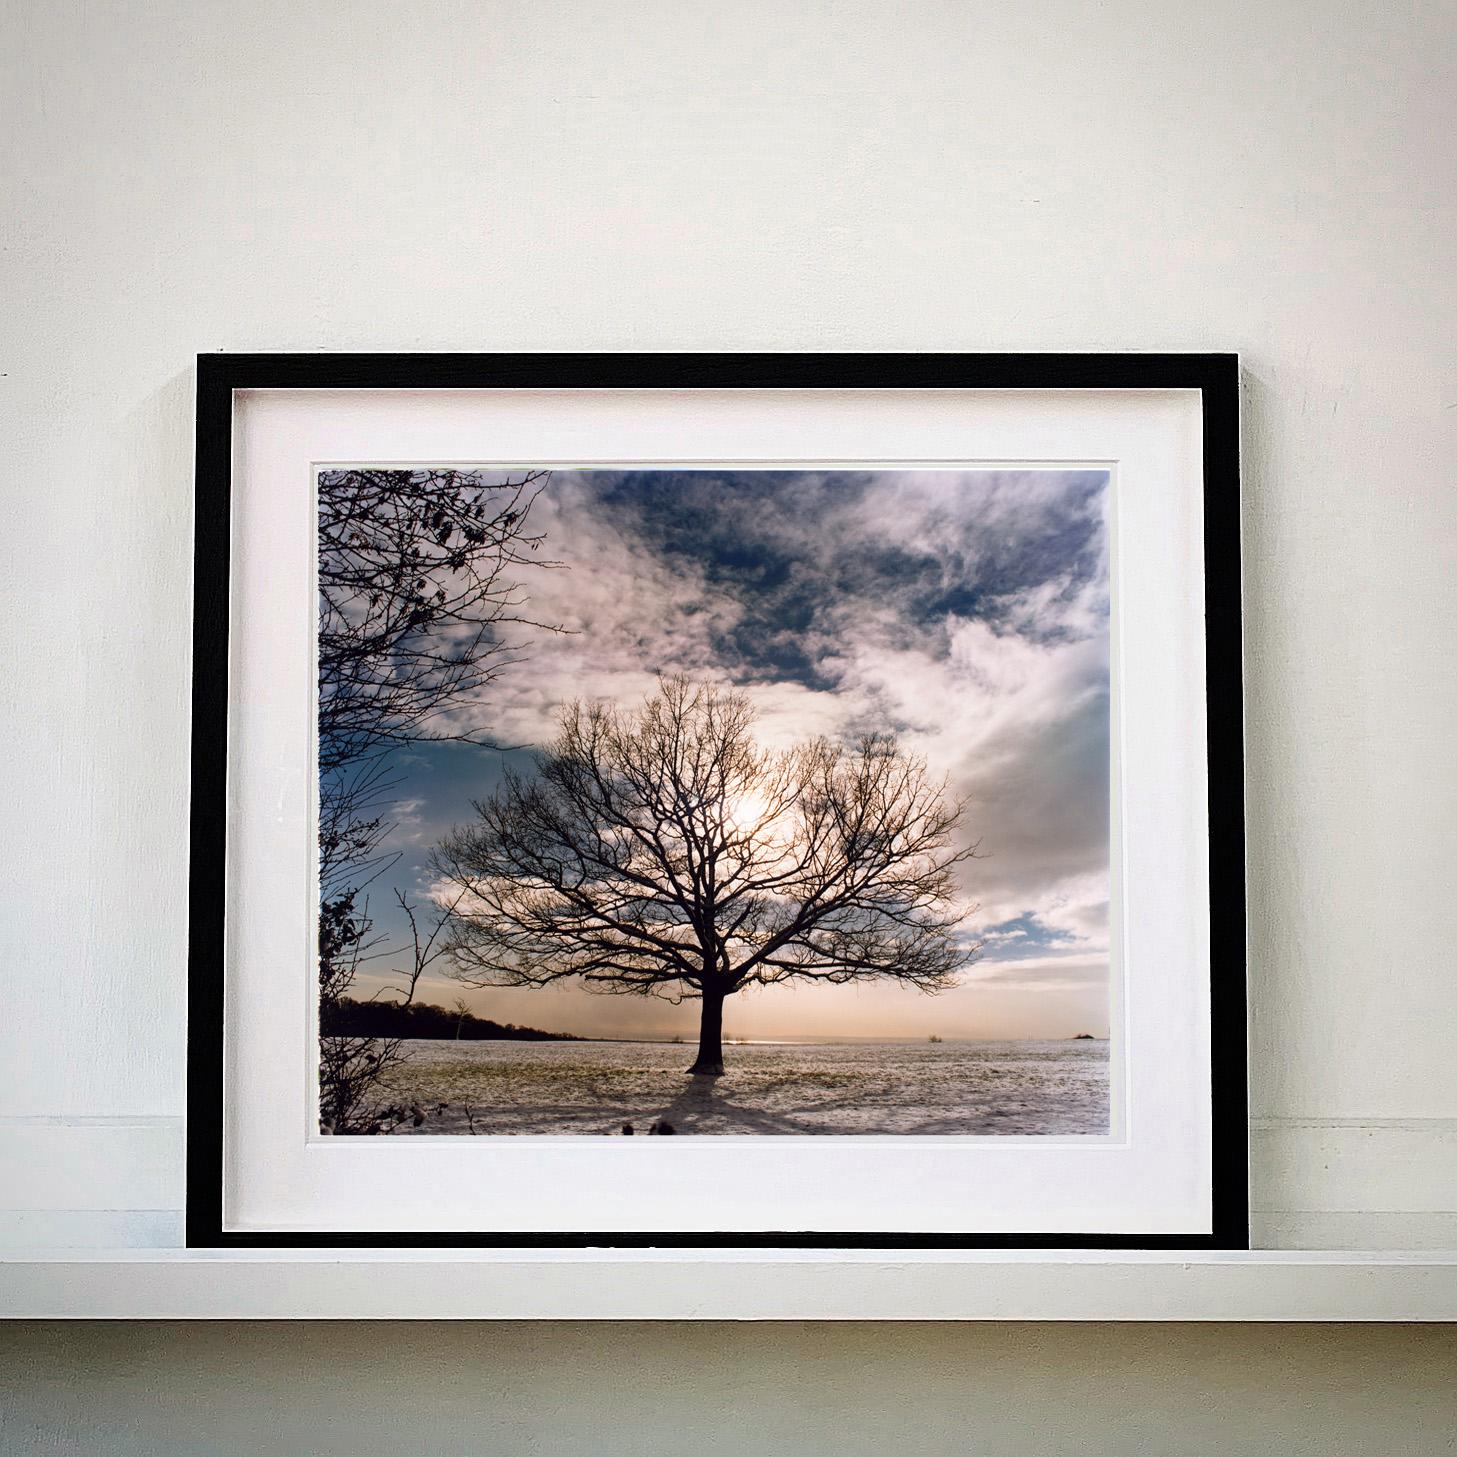 One Tree Hill, Langdon Hills Country Park - English landscape photography - Photograph by Richard Heeps